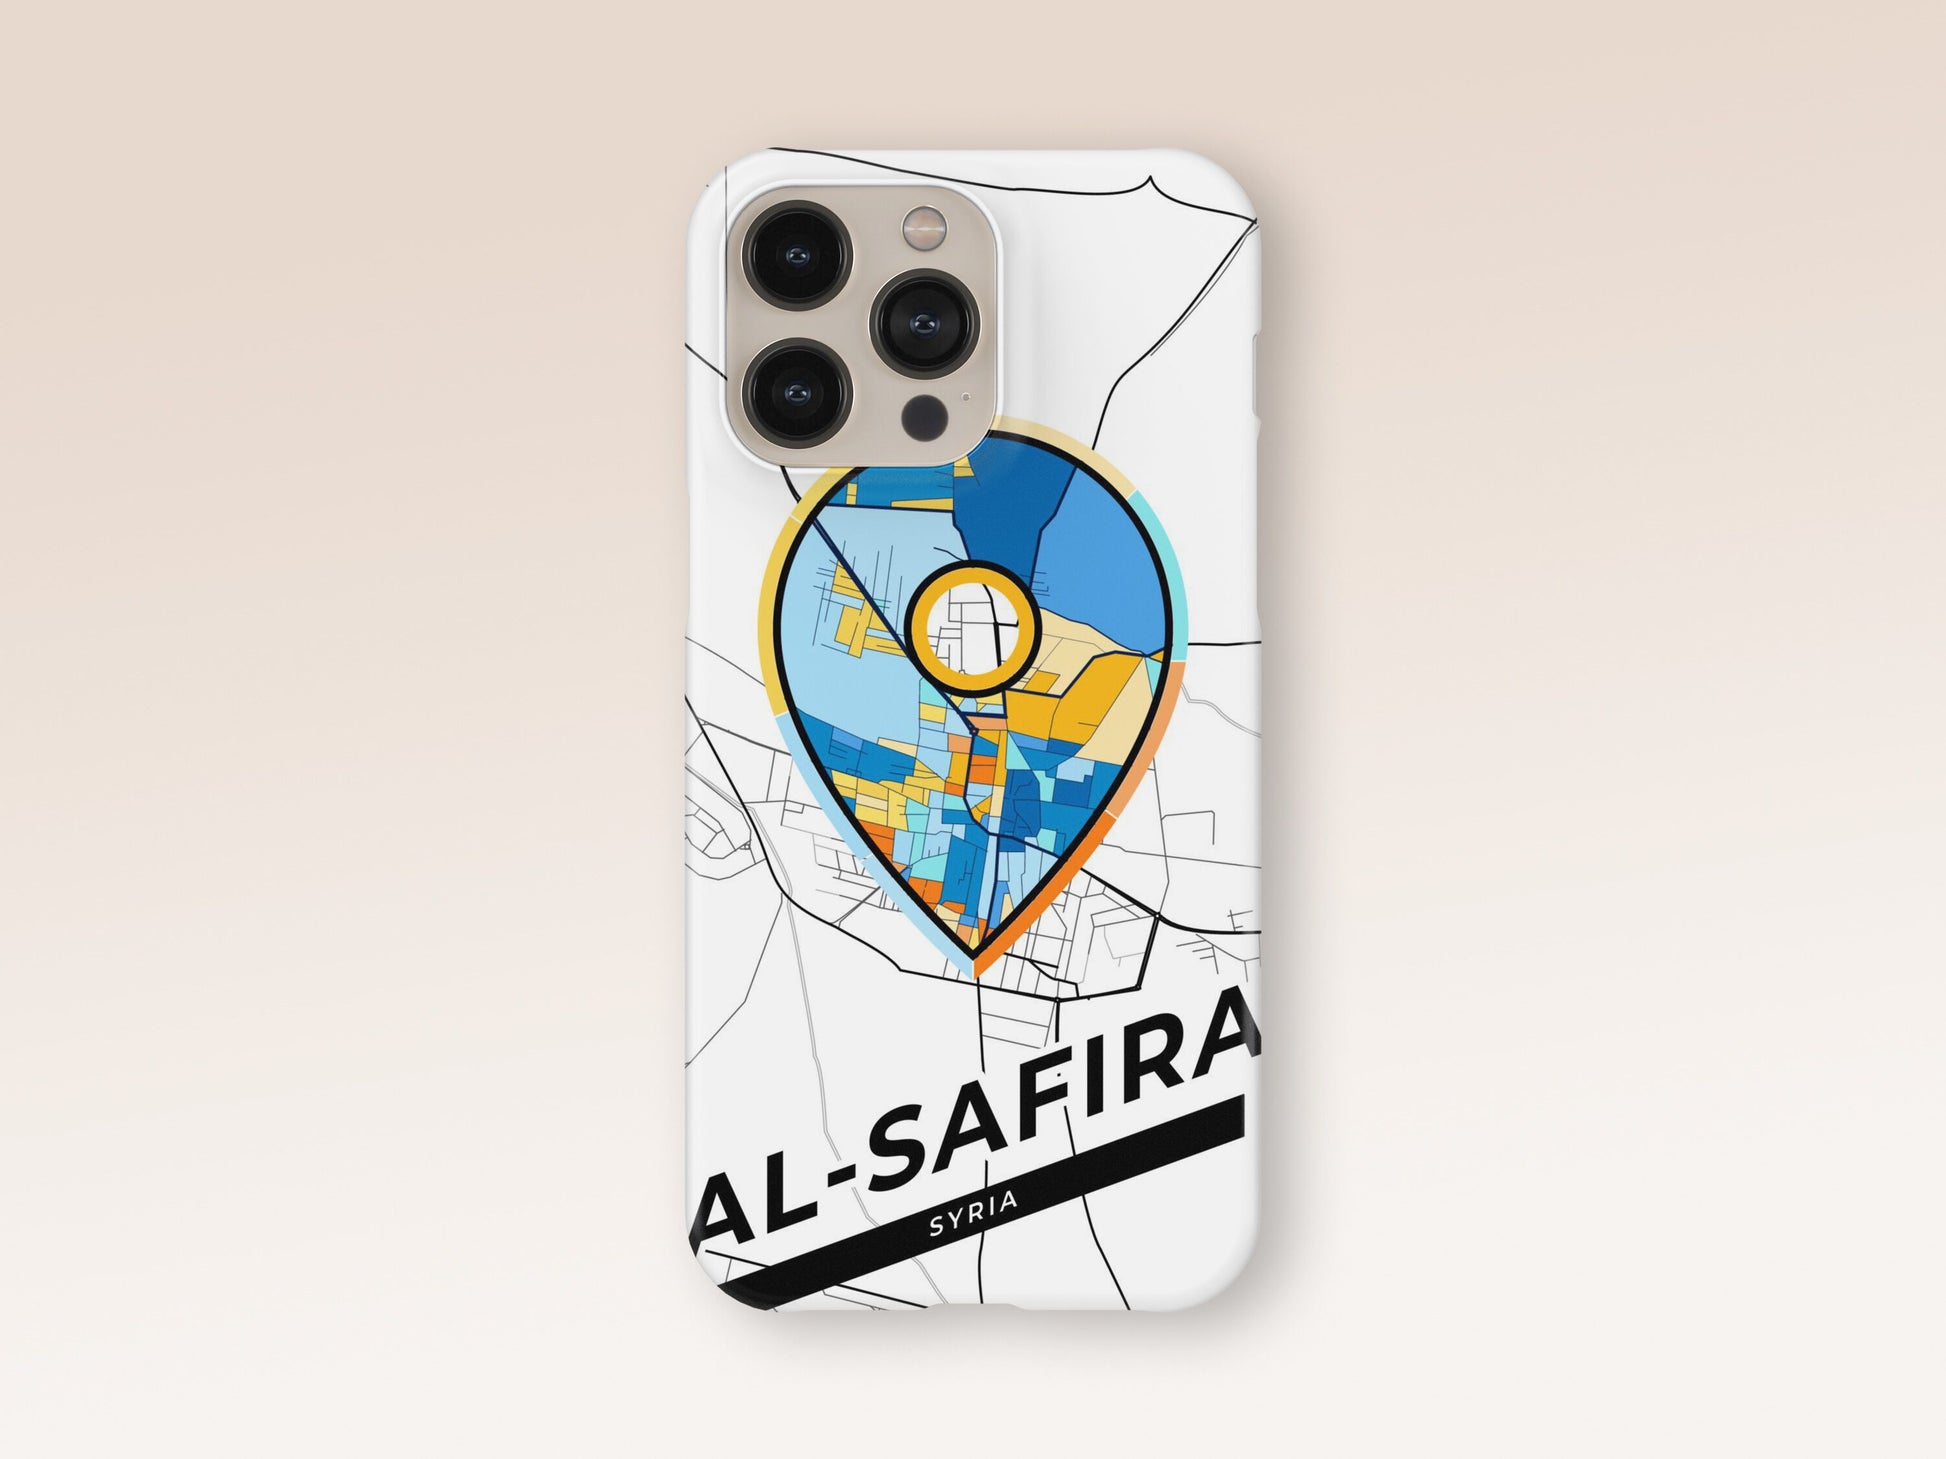 Al-Safira Syria slim phone case with colorful icon. Birthday, wedding or housewarming gift. Couple match cases. 1